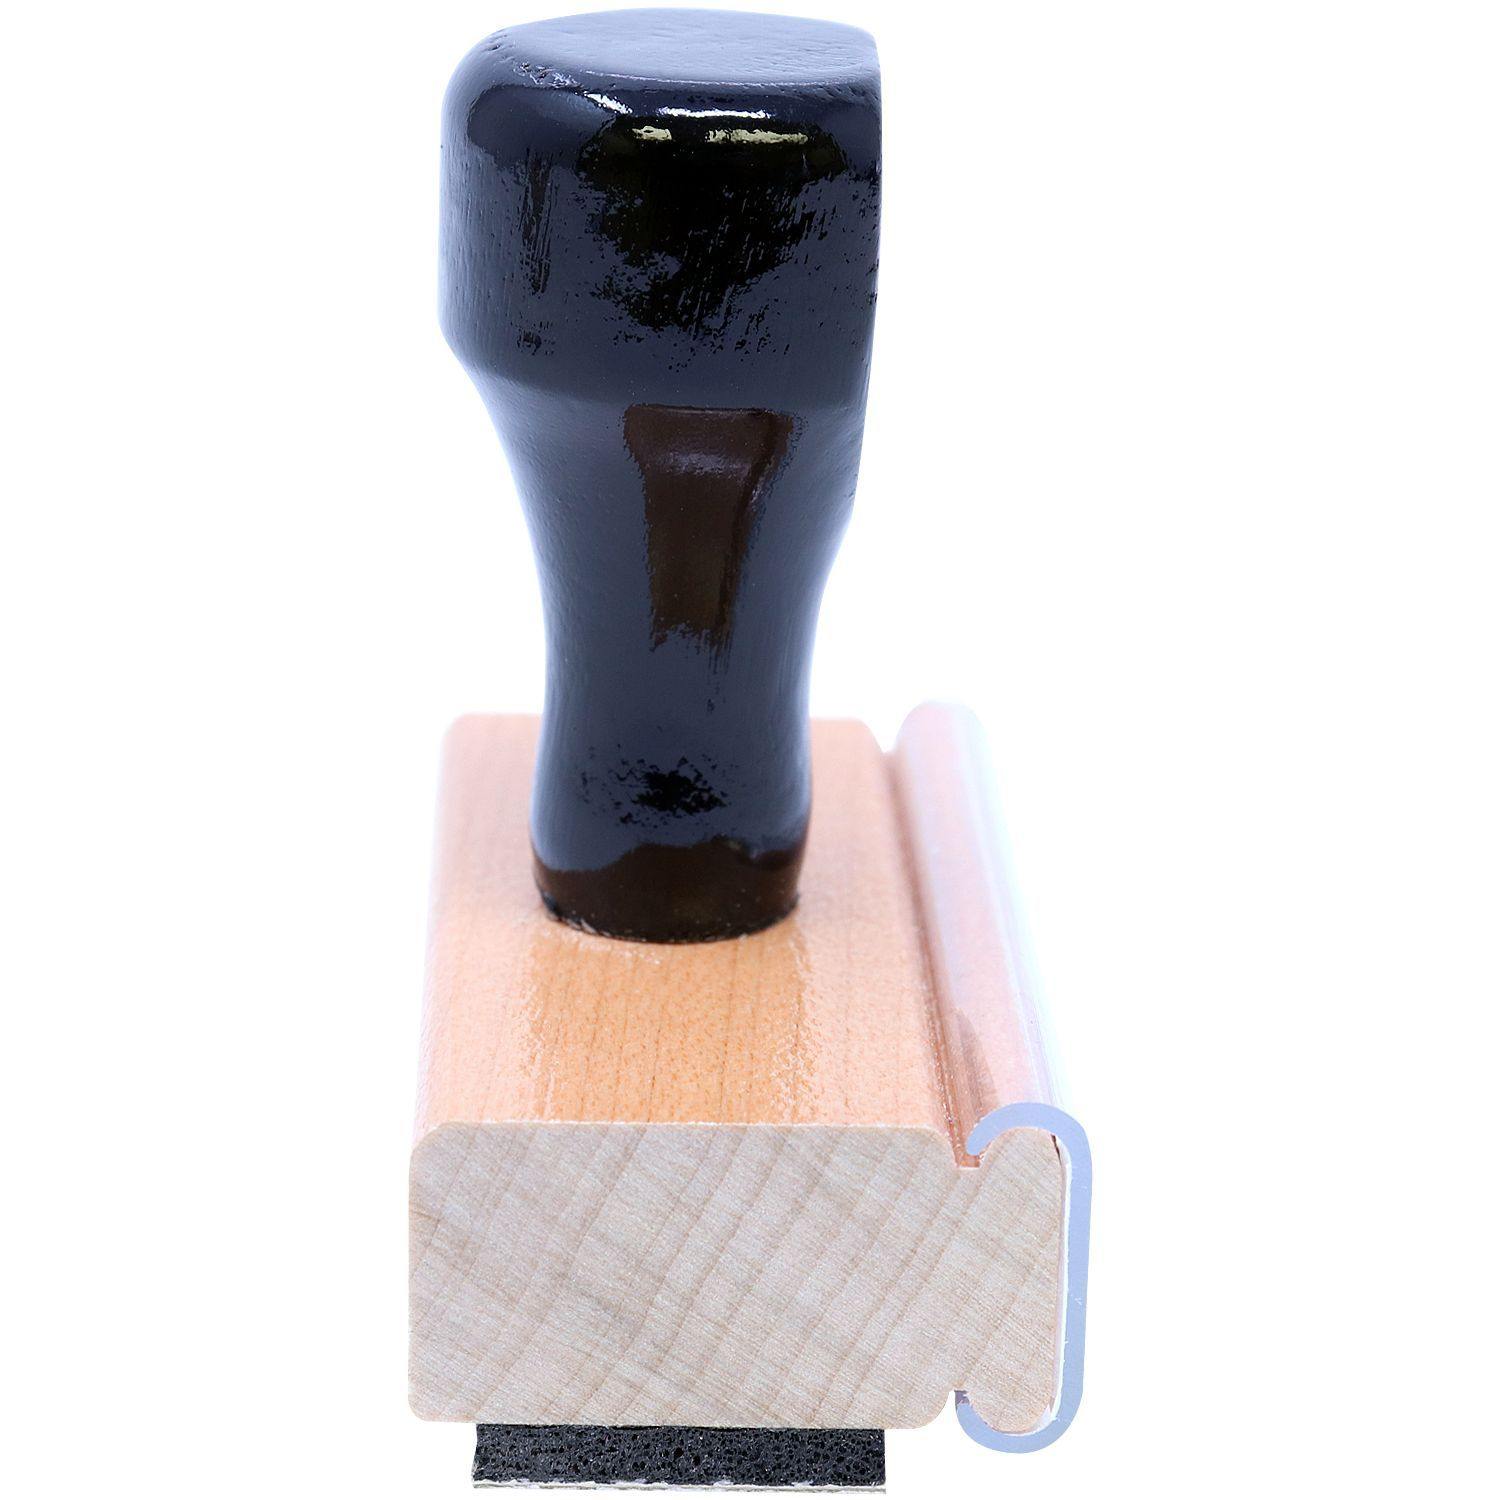 Muestra Rubber Stamp - Engineer Seal Stamps - Brand_Acorn, Impression Size_Small, Stamp Type_Regular Stamp, Type of Use_General, Type of Use_Office